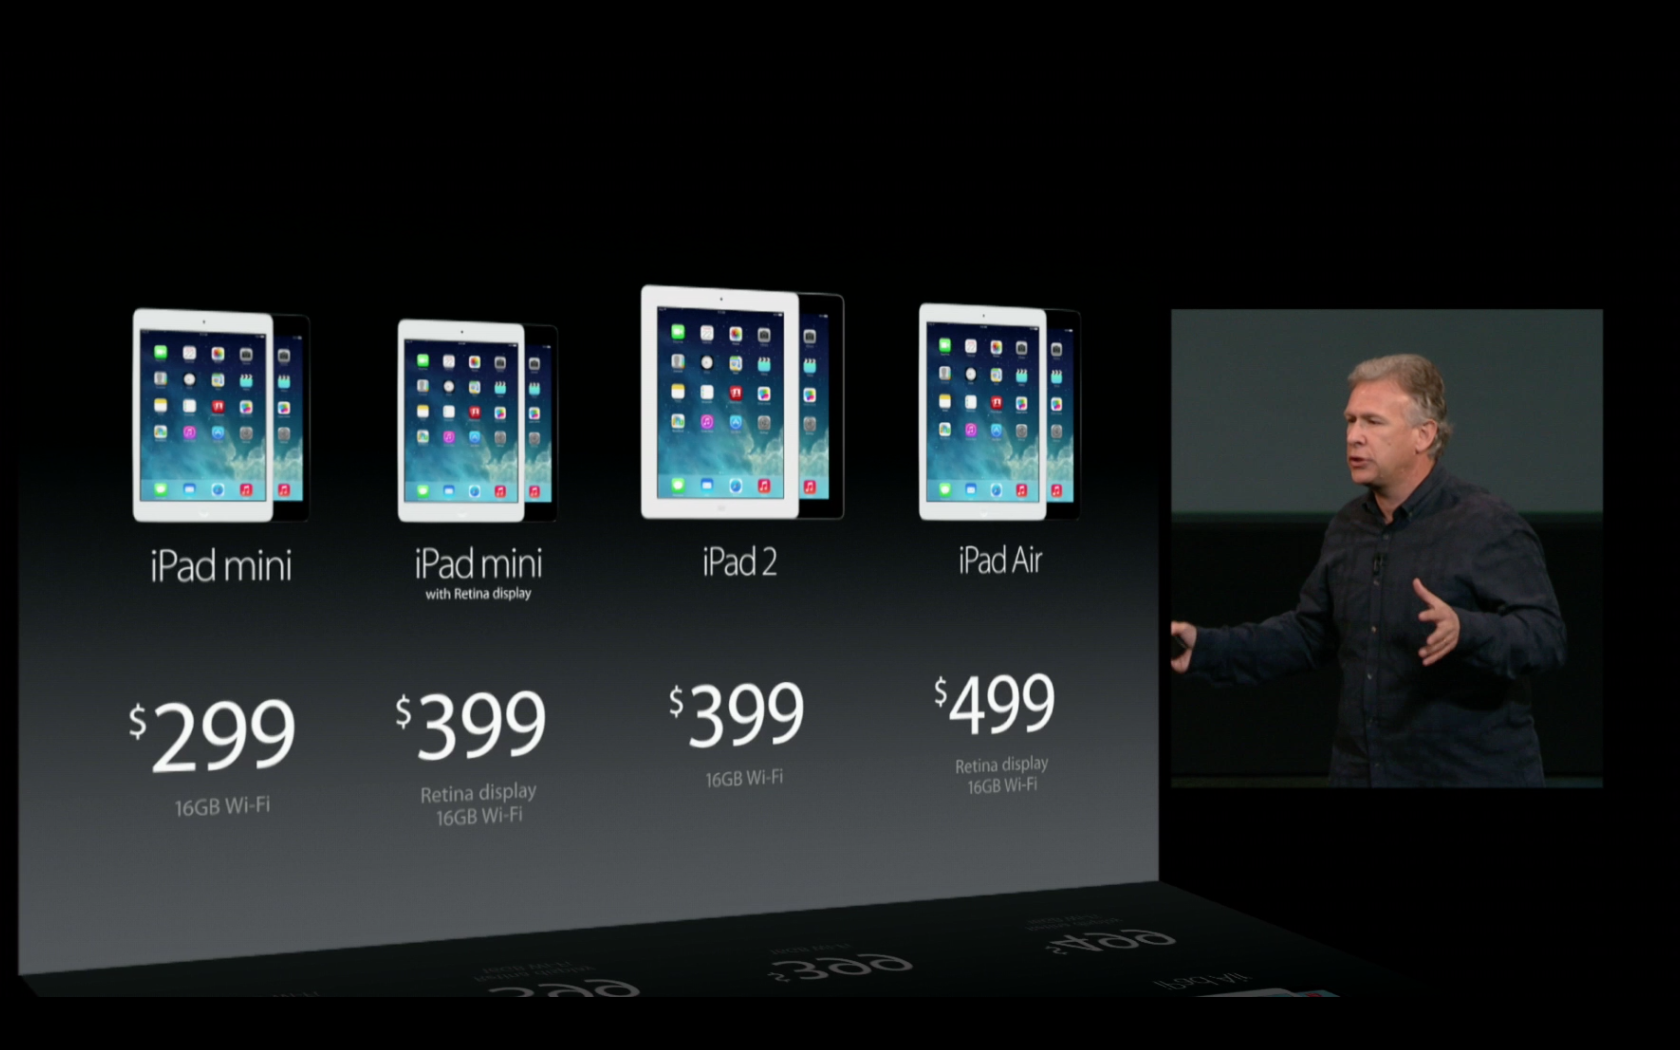 The iPad 4 is no longer available from Apple, but the iPad 2 lives on.